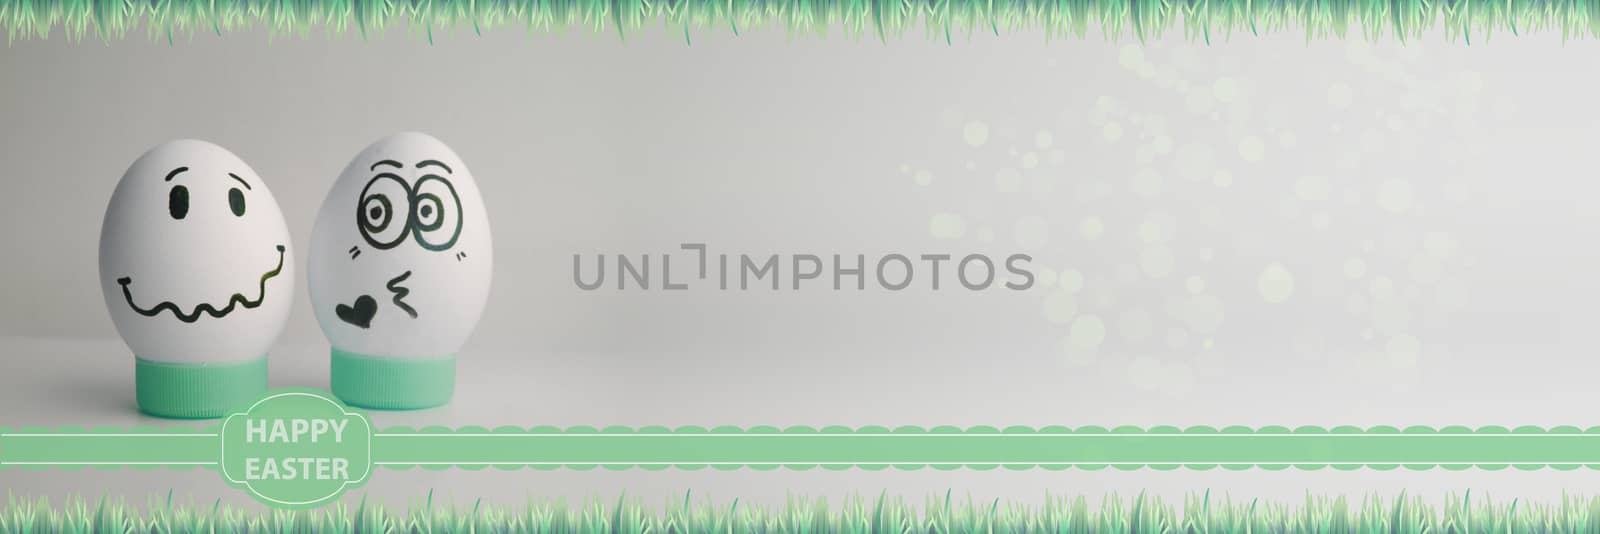 Easter eggs two pieces with faces drawn on a light background a line of grass. Photo for your design with a place under the text